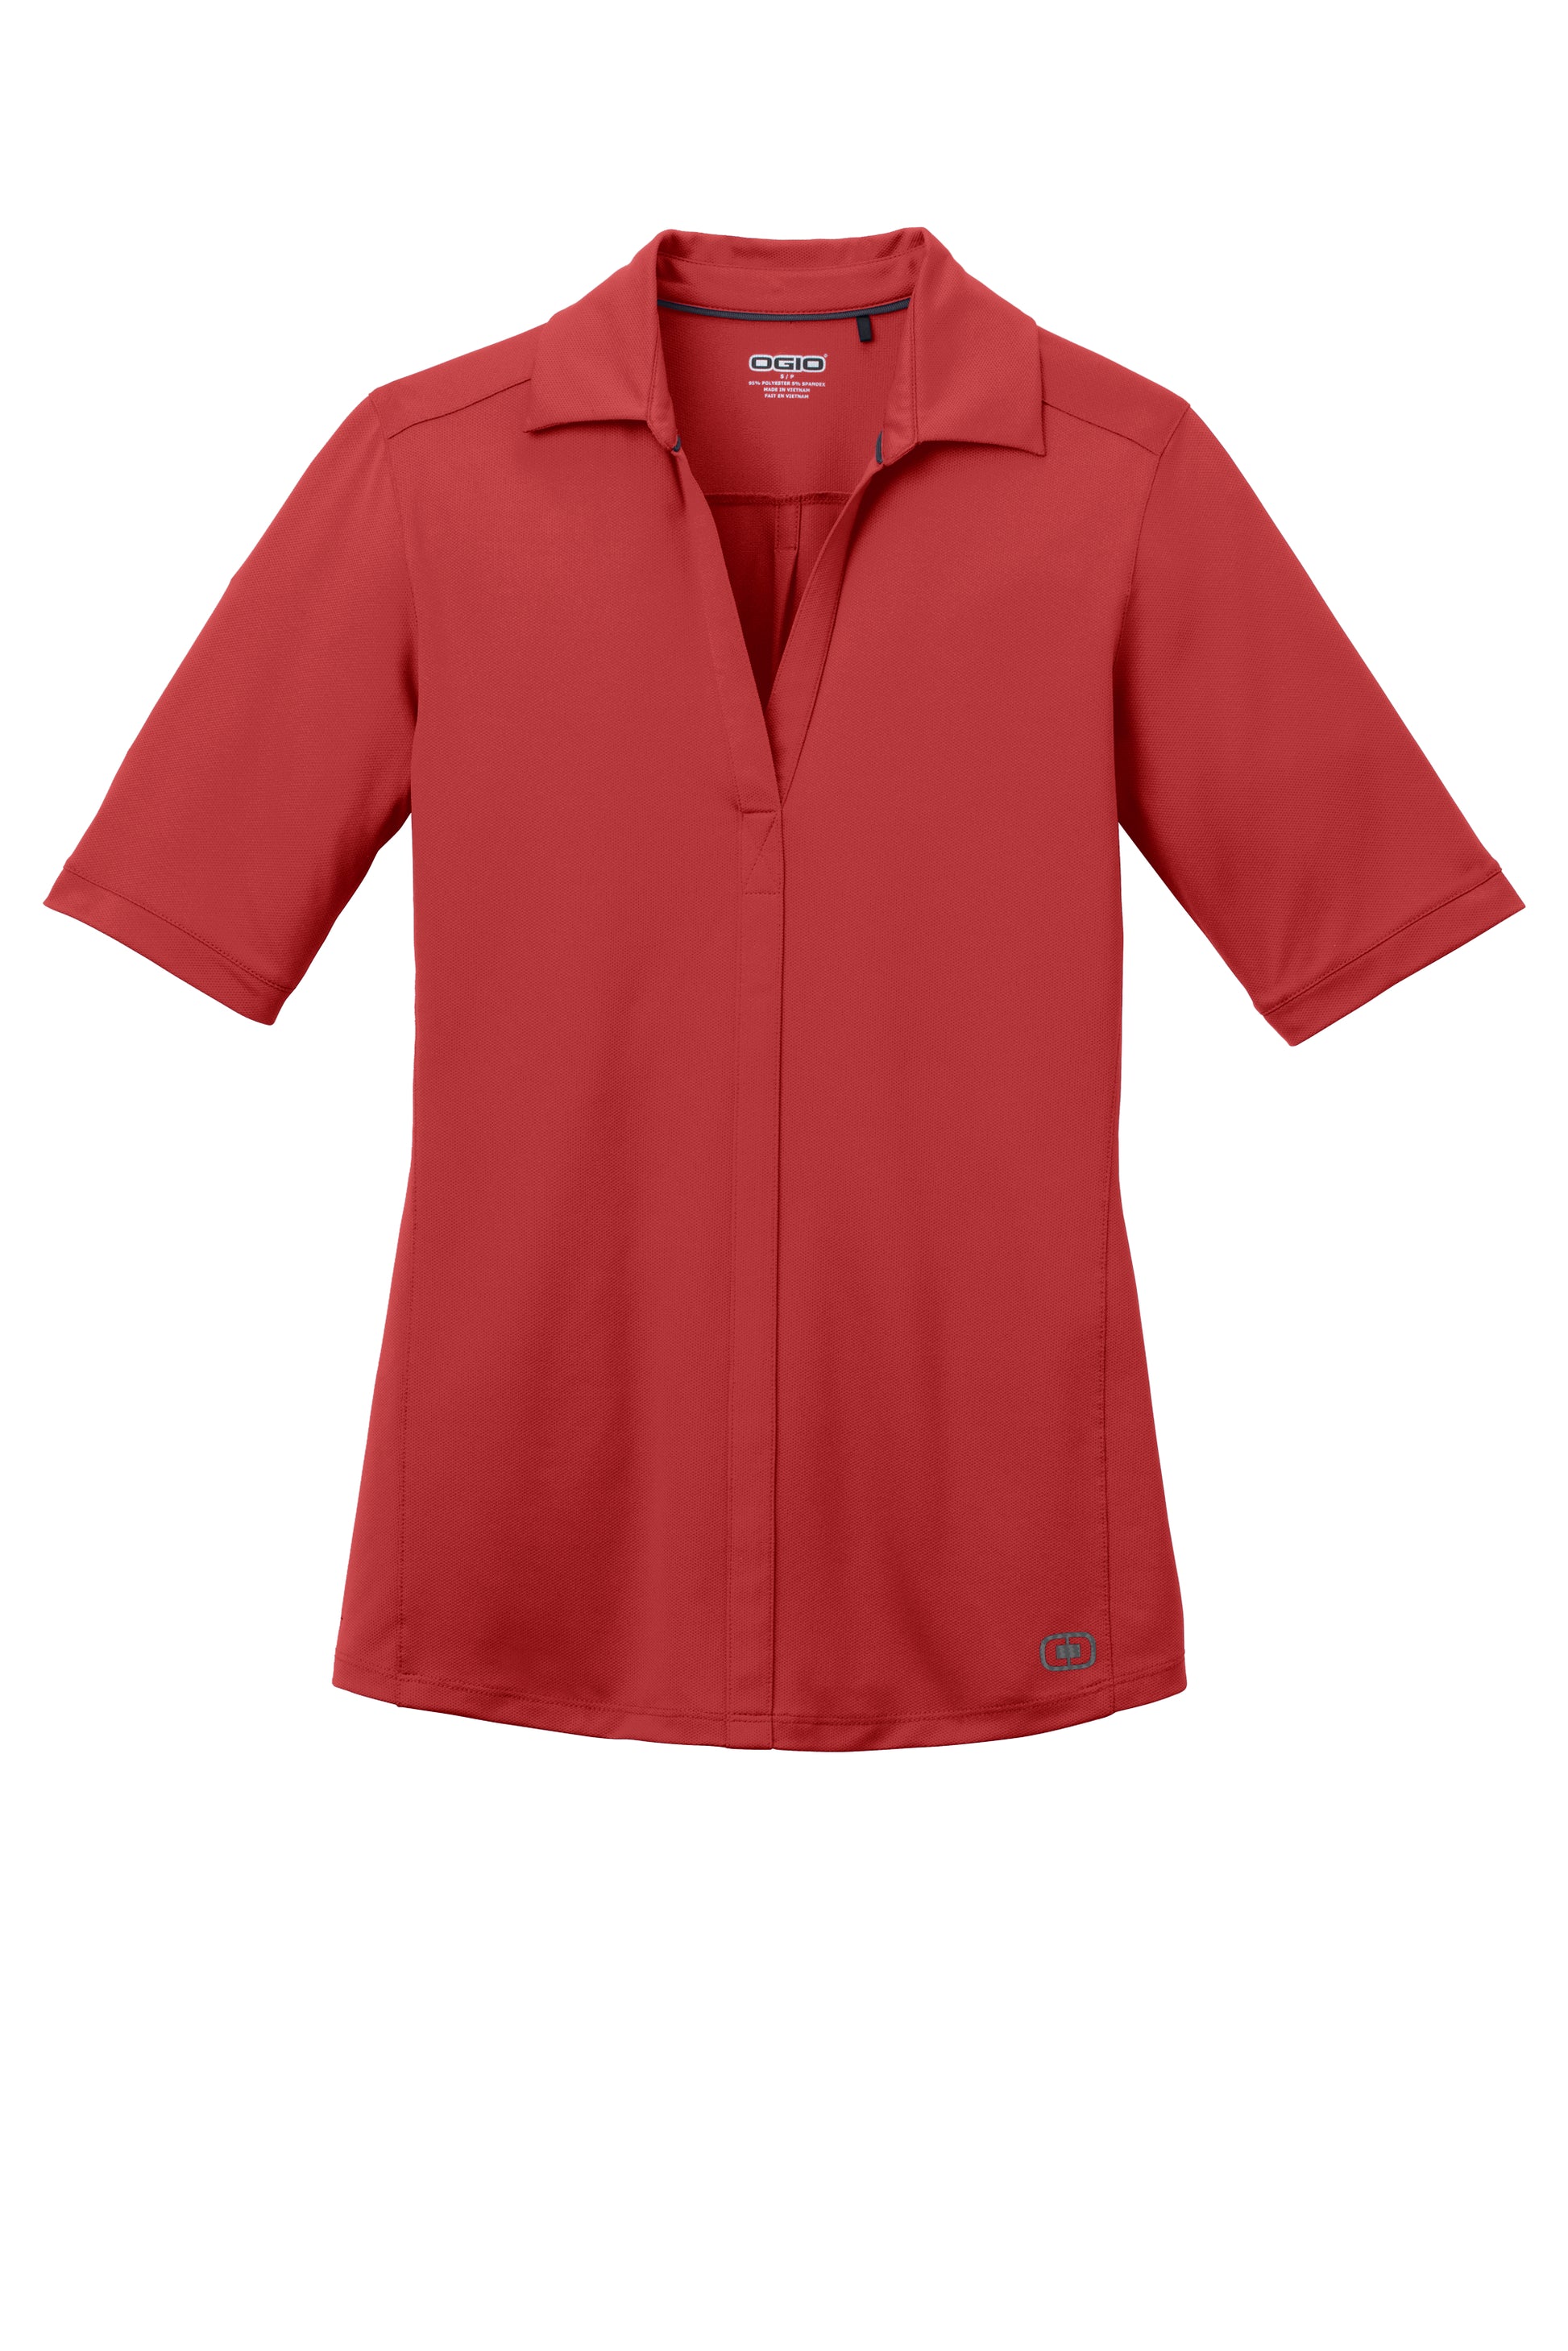 ogio womens metro polo ripped red